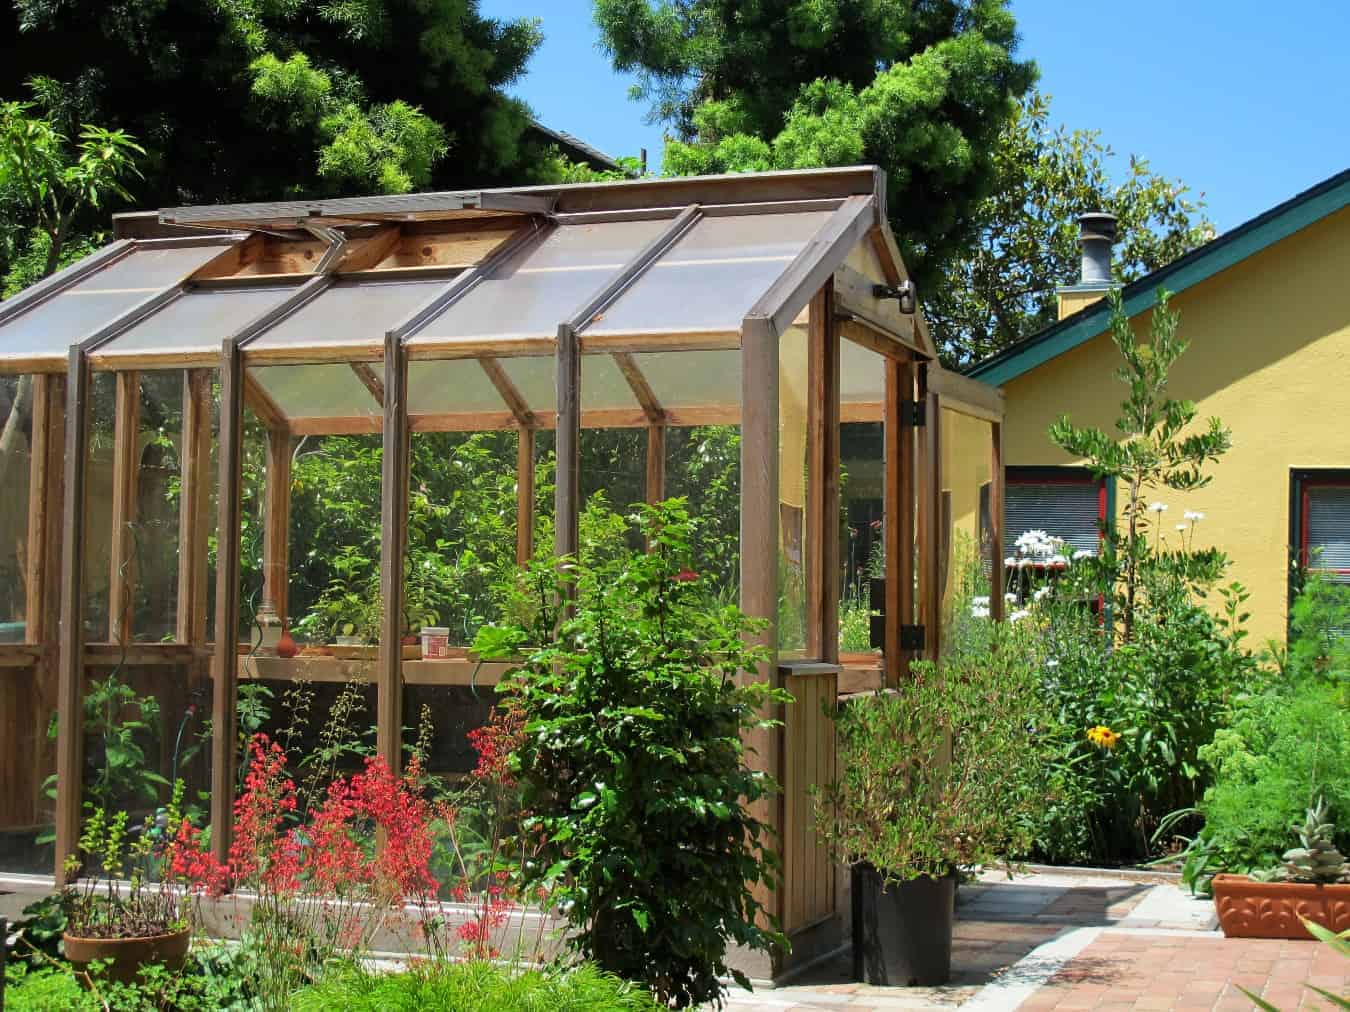 Greenhouses provide a year-round growing season | Home ...